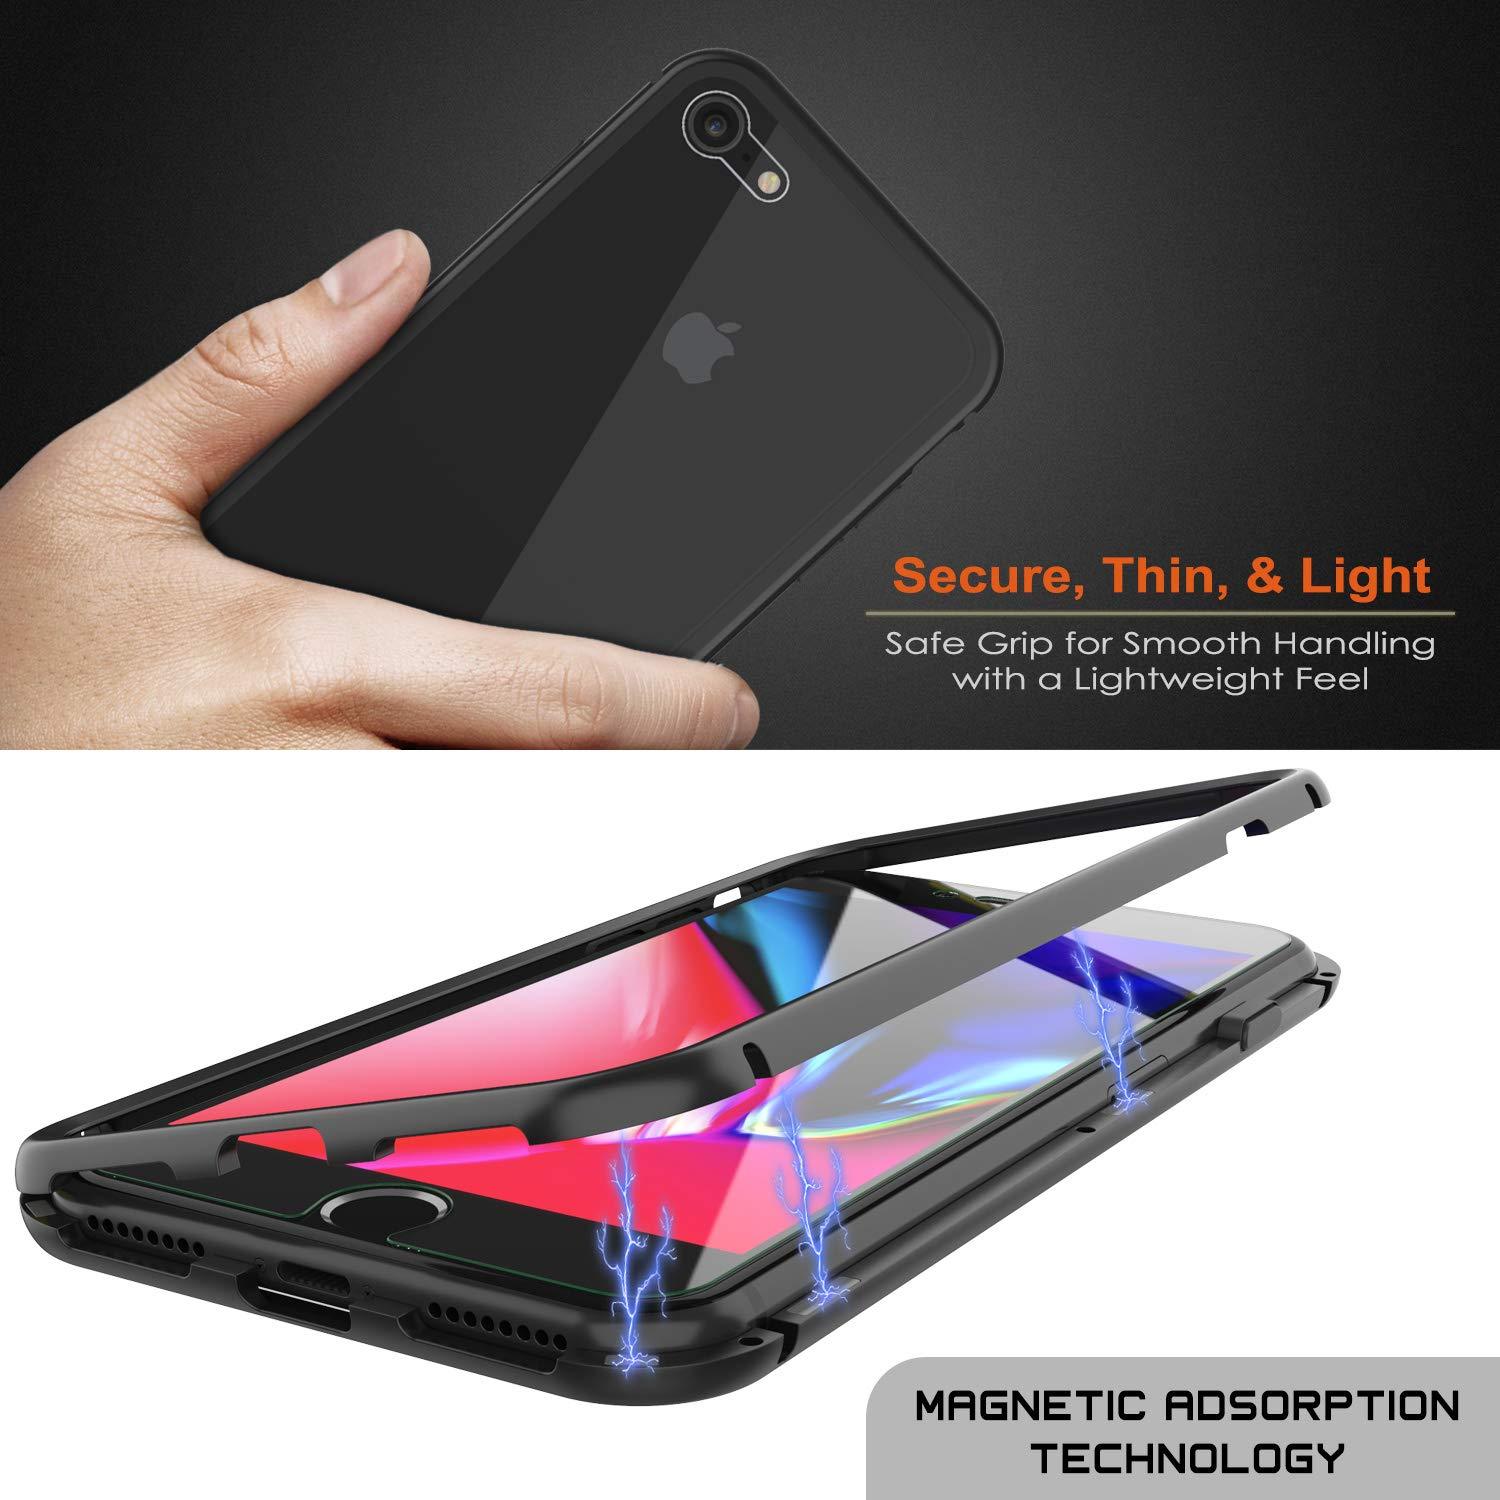 iPhone 8 Case, Punkcase Magnetix 2.0 Protective TPU Cover W/ Tempered Glass Screen Protector [Black]